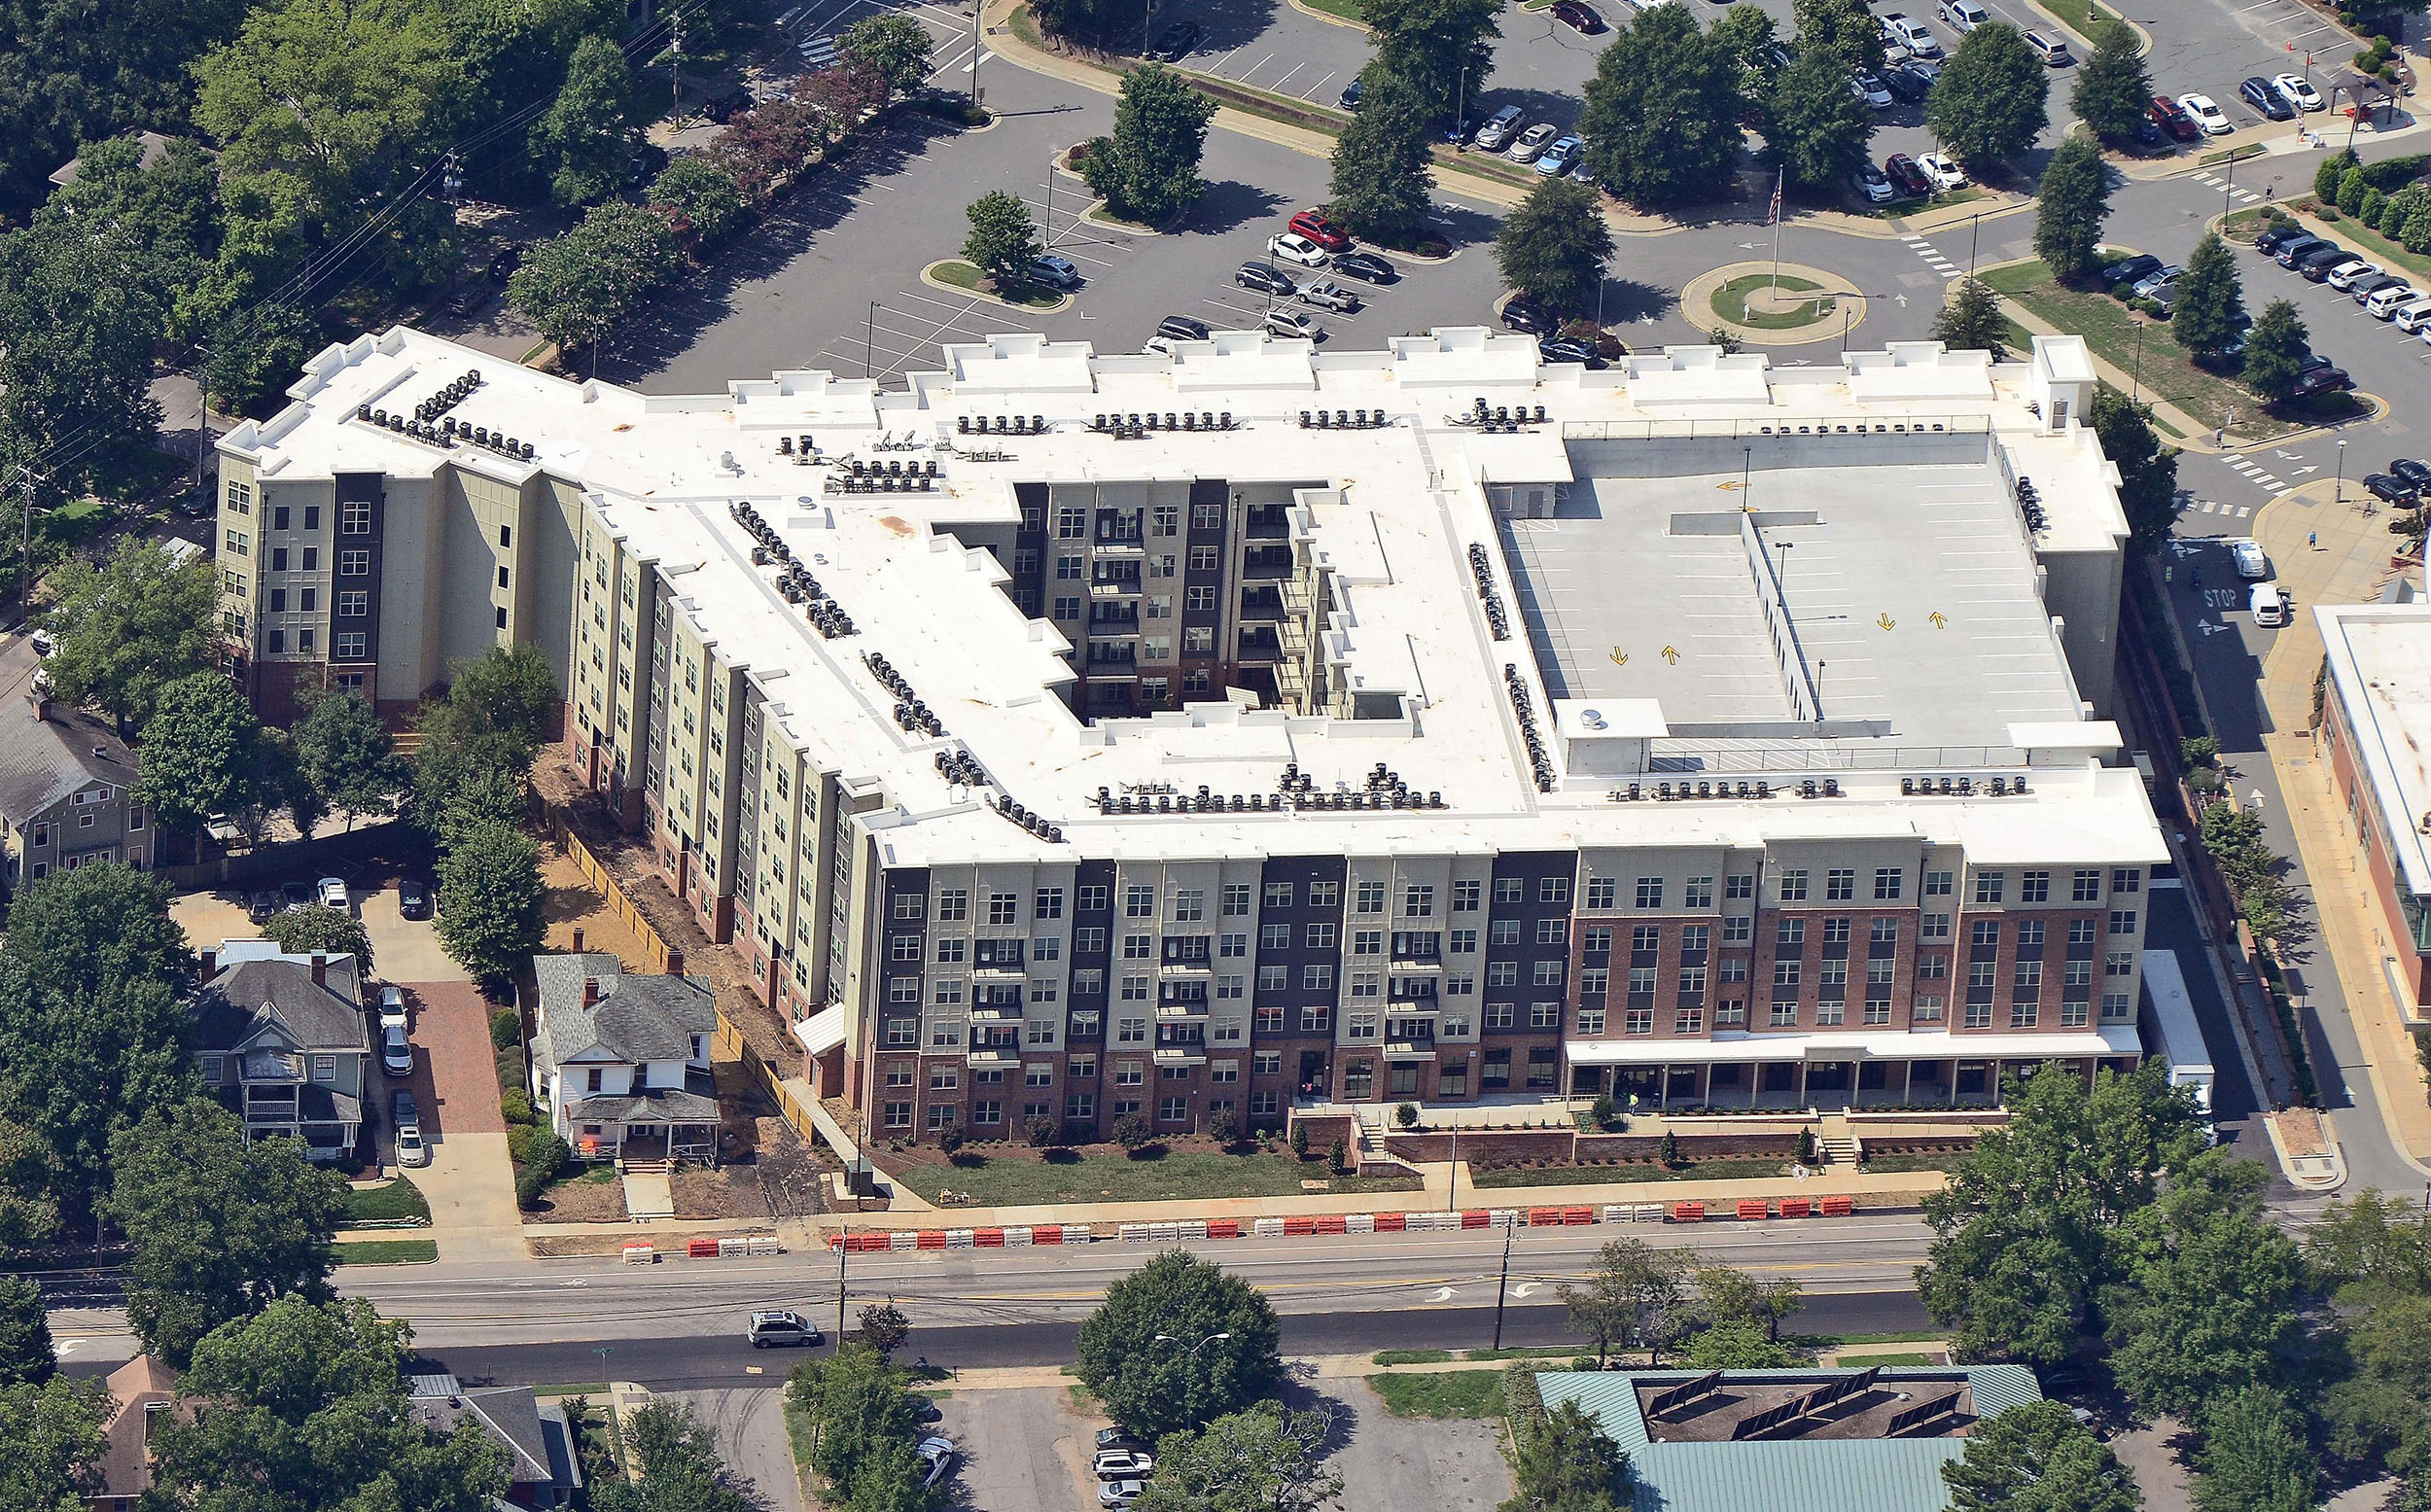 Luxury student housing apartments with inner courtyard aerial view